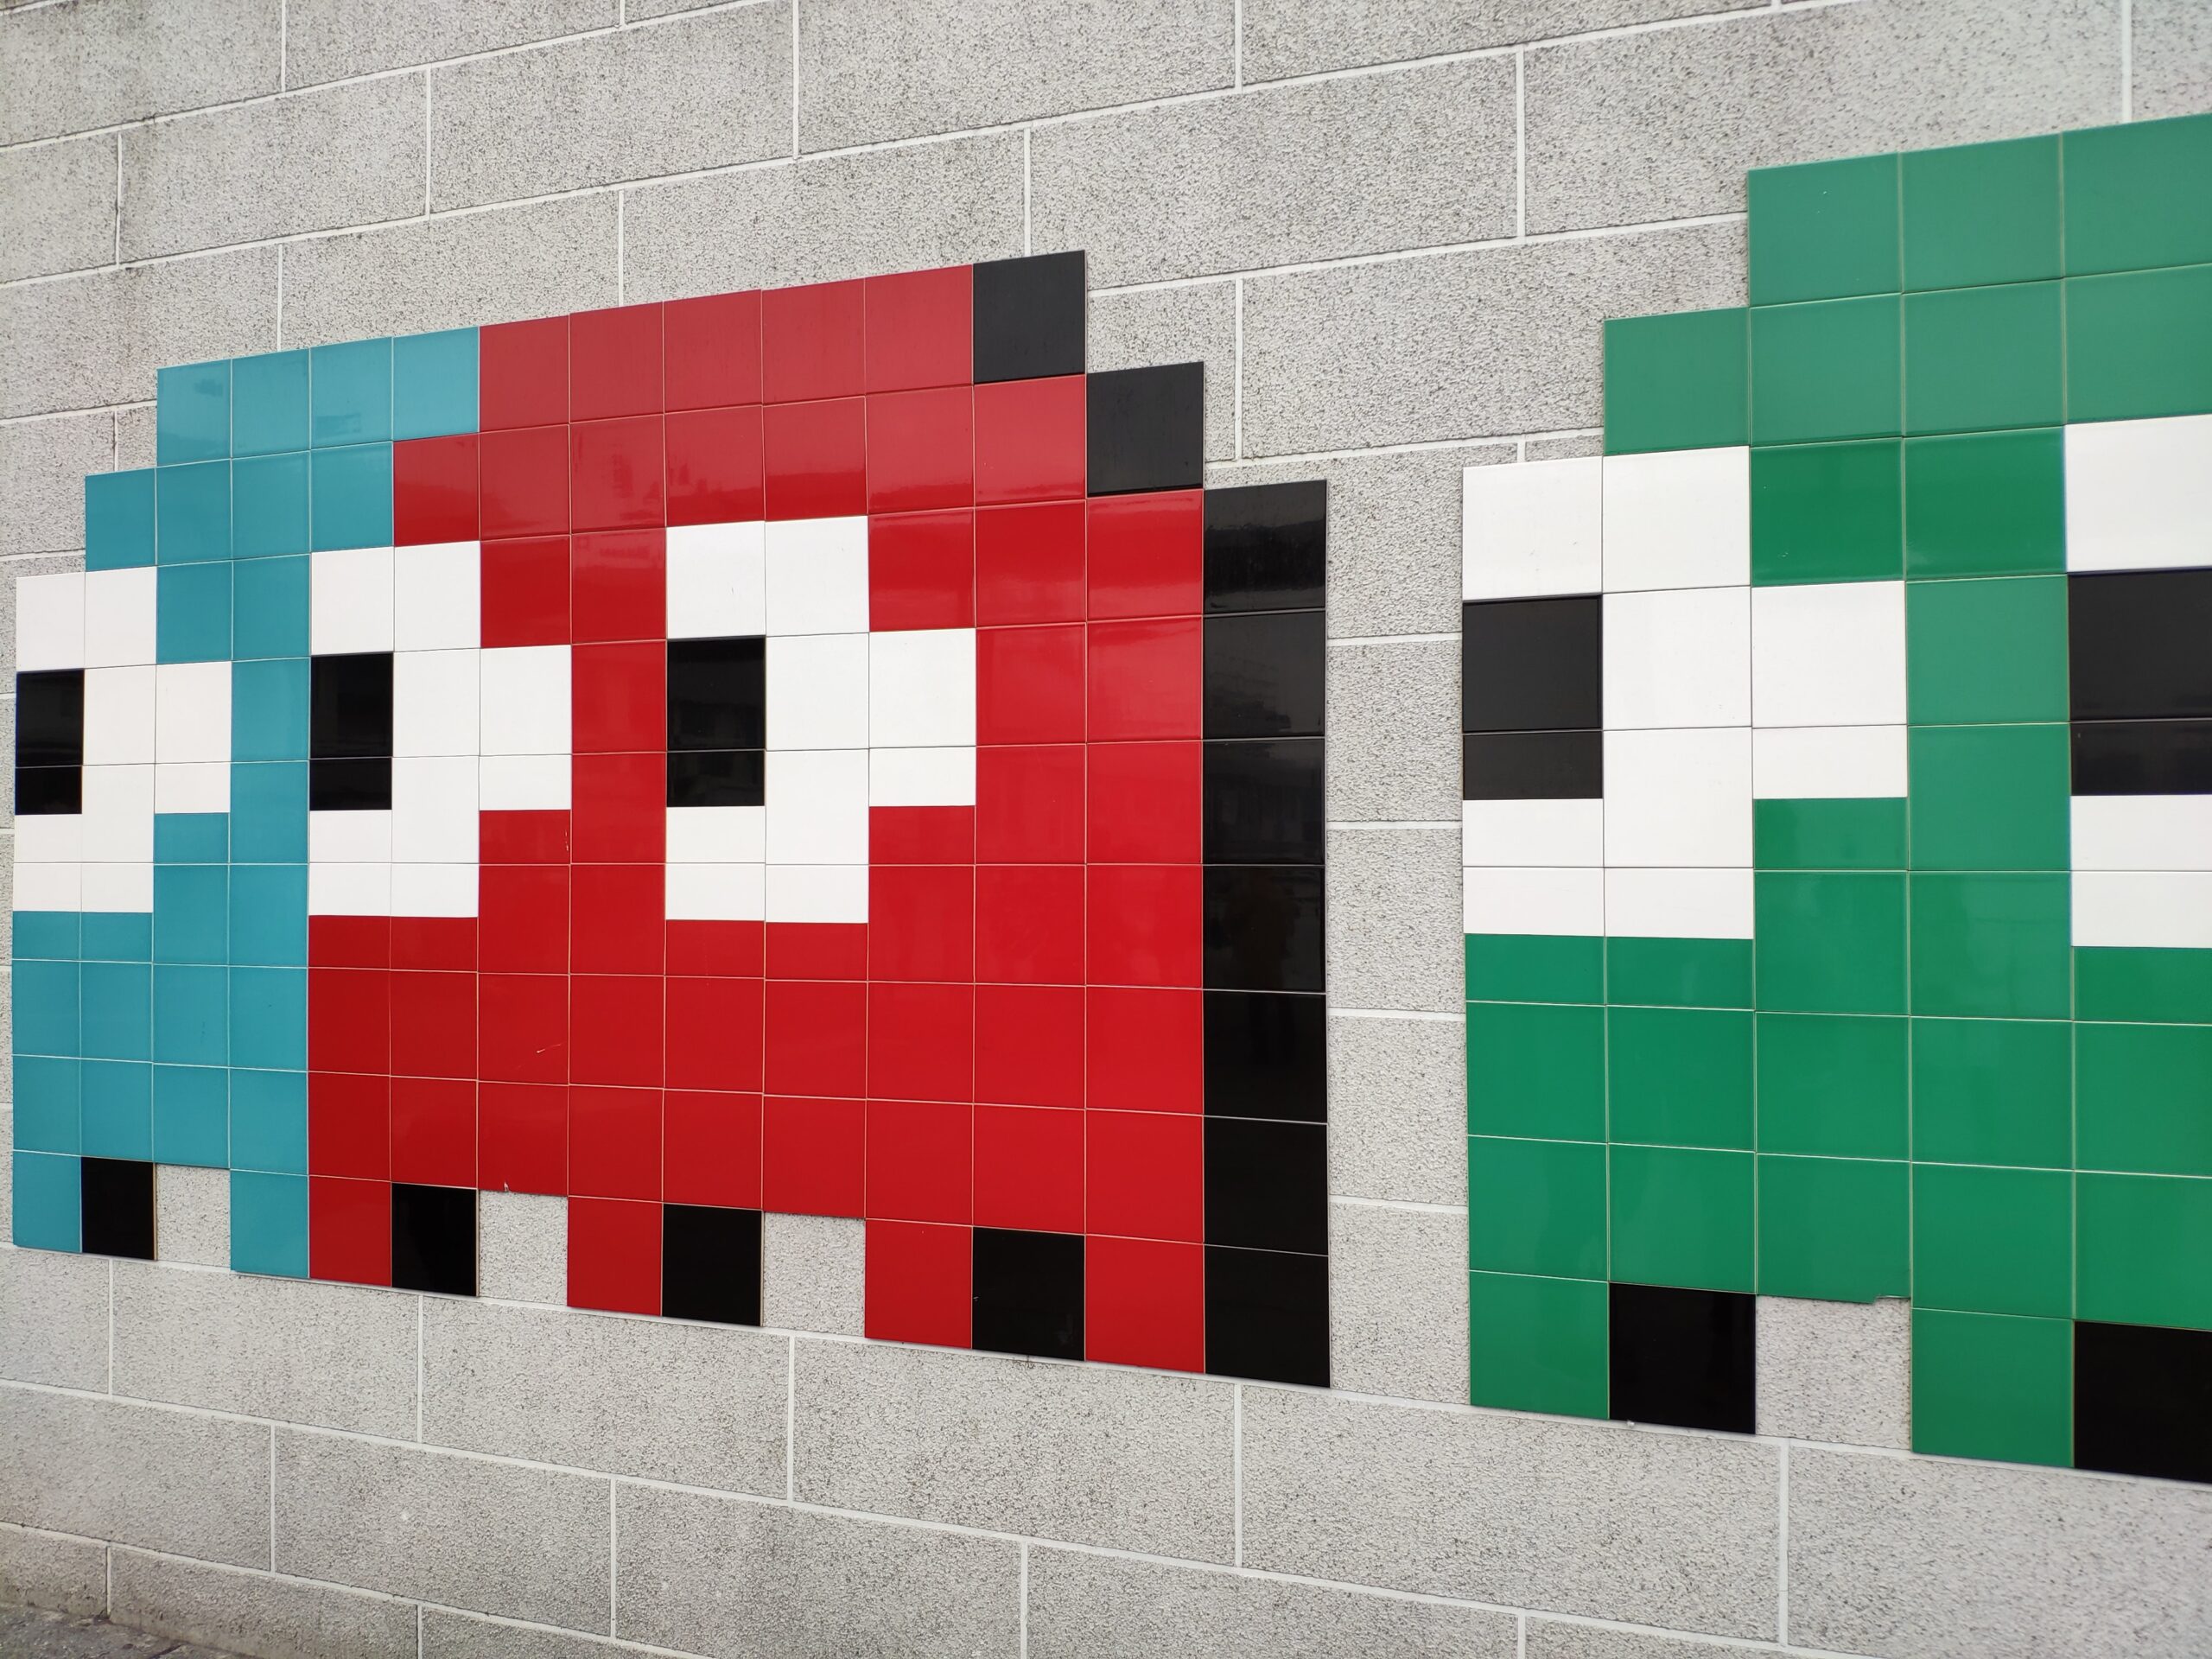 This image shows a wall full of Pac-Man ghosts, part of a videogame.